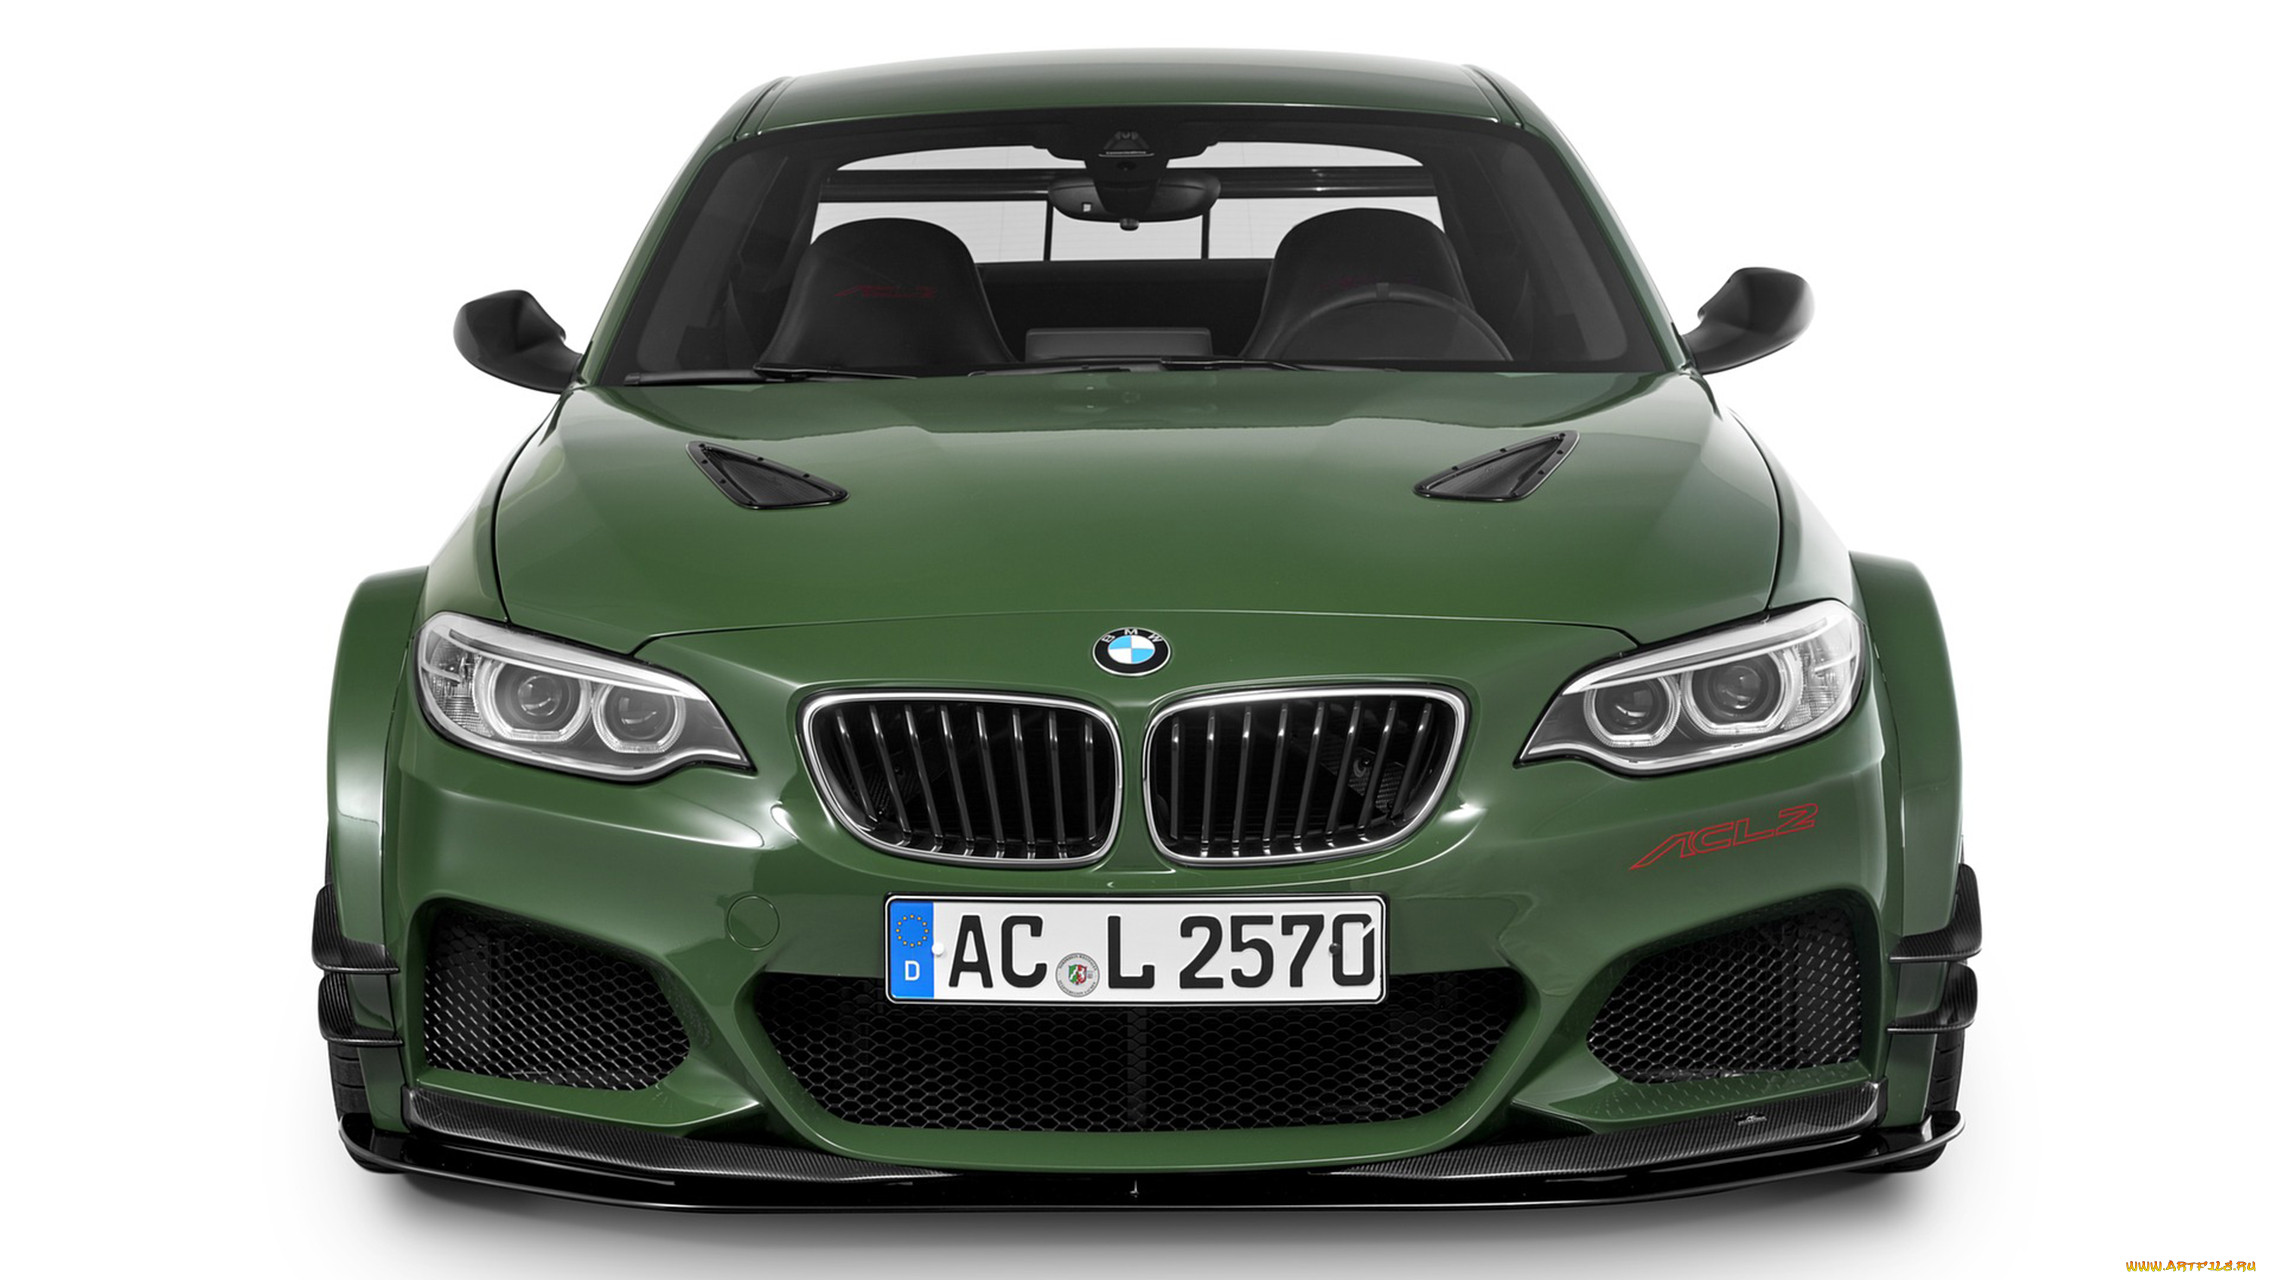 ac schnitzer acl2 concept based on the bmw m-235i coupe 2016, , bmw, ac, schnitzer, concept, acl2, m-235i, coupe, 2016, based